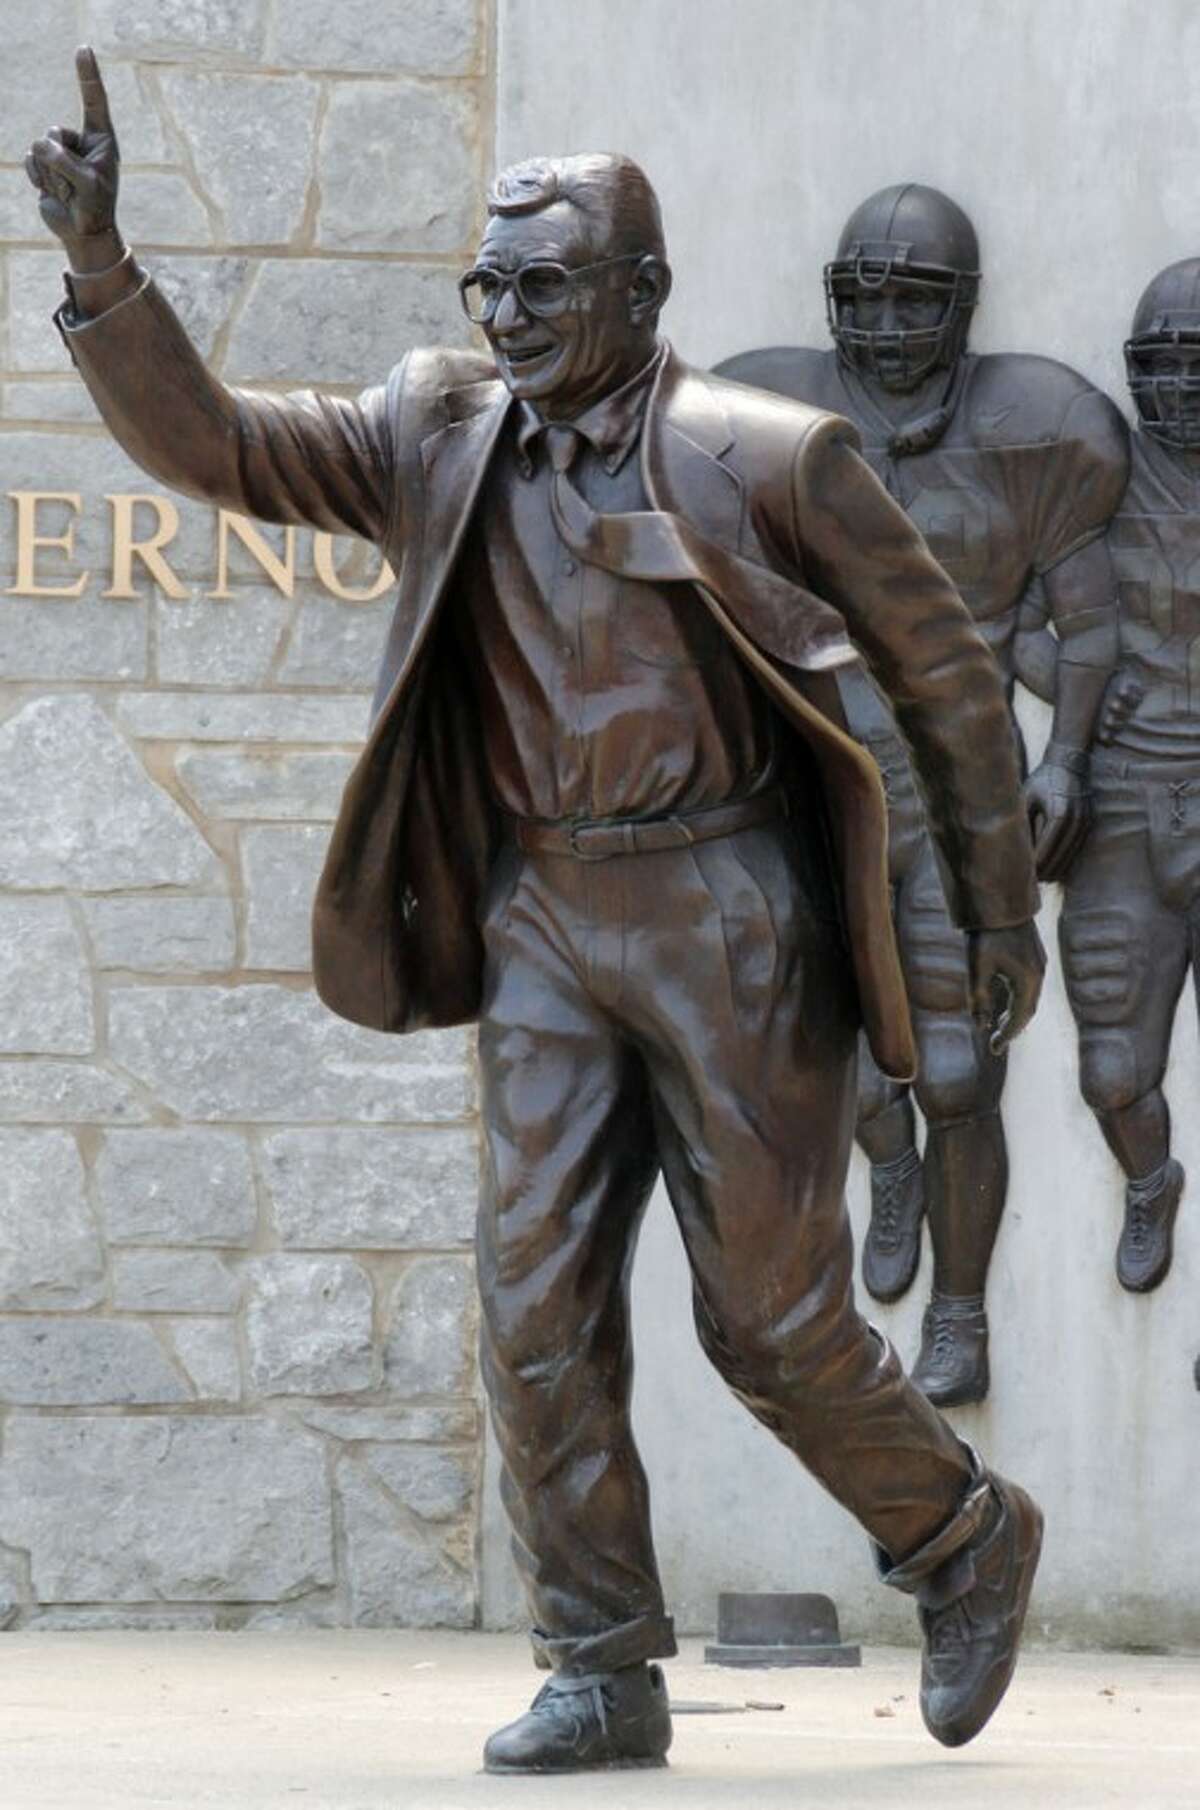 FILE - A statue of former Penn State University head football coach Joe Paterno stands outside Beaver Stadium on in this July 12, 2012 file photo. Police and construction workers have barricaded both sides of street and the sidewalks near the Joe Paterno statue at Penn State University. A chain-link fence has been erected around the perimeter surrounding the statue. (AP Photo/Gene J. Puskar, File)